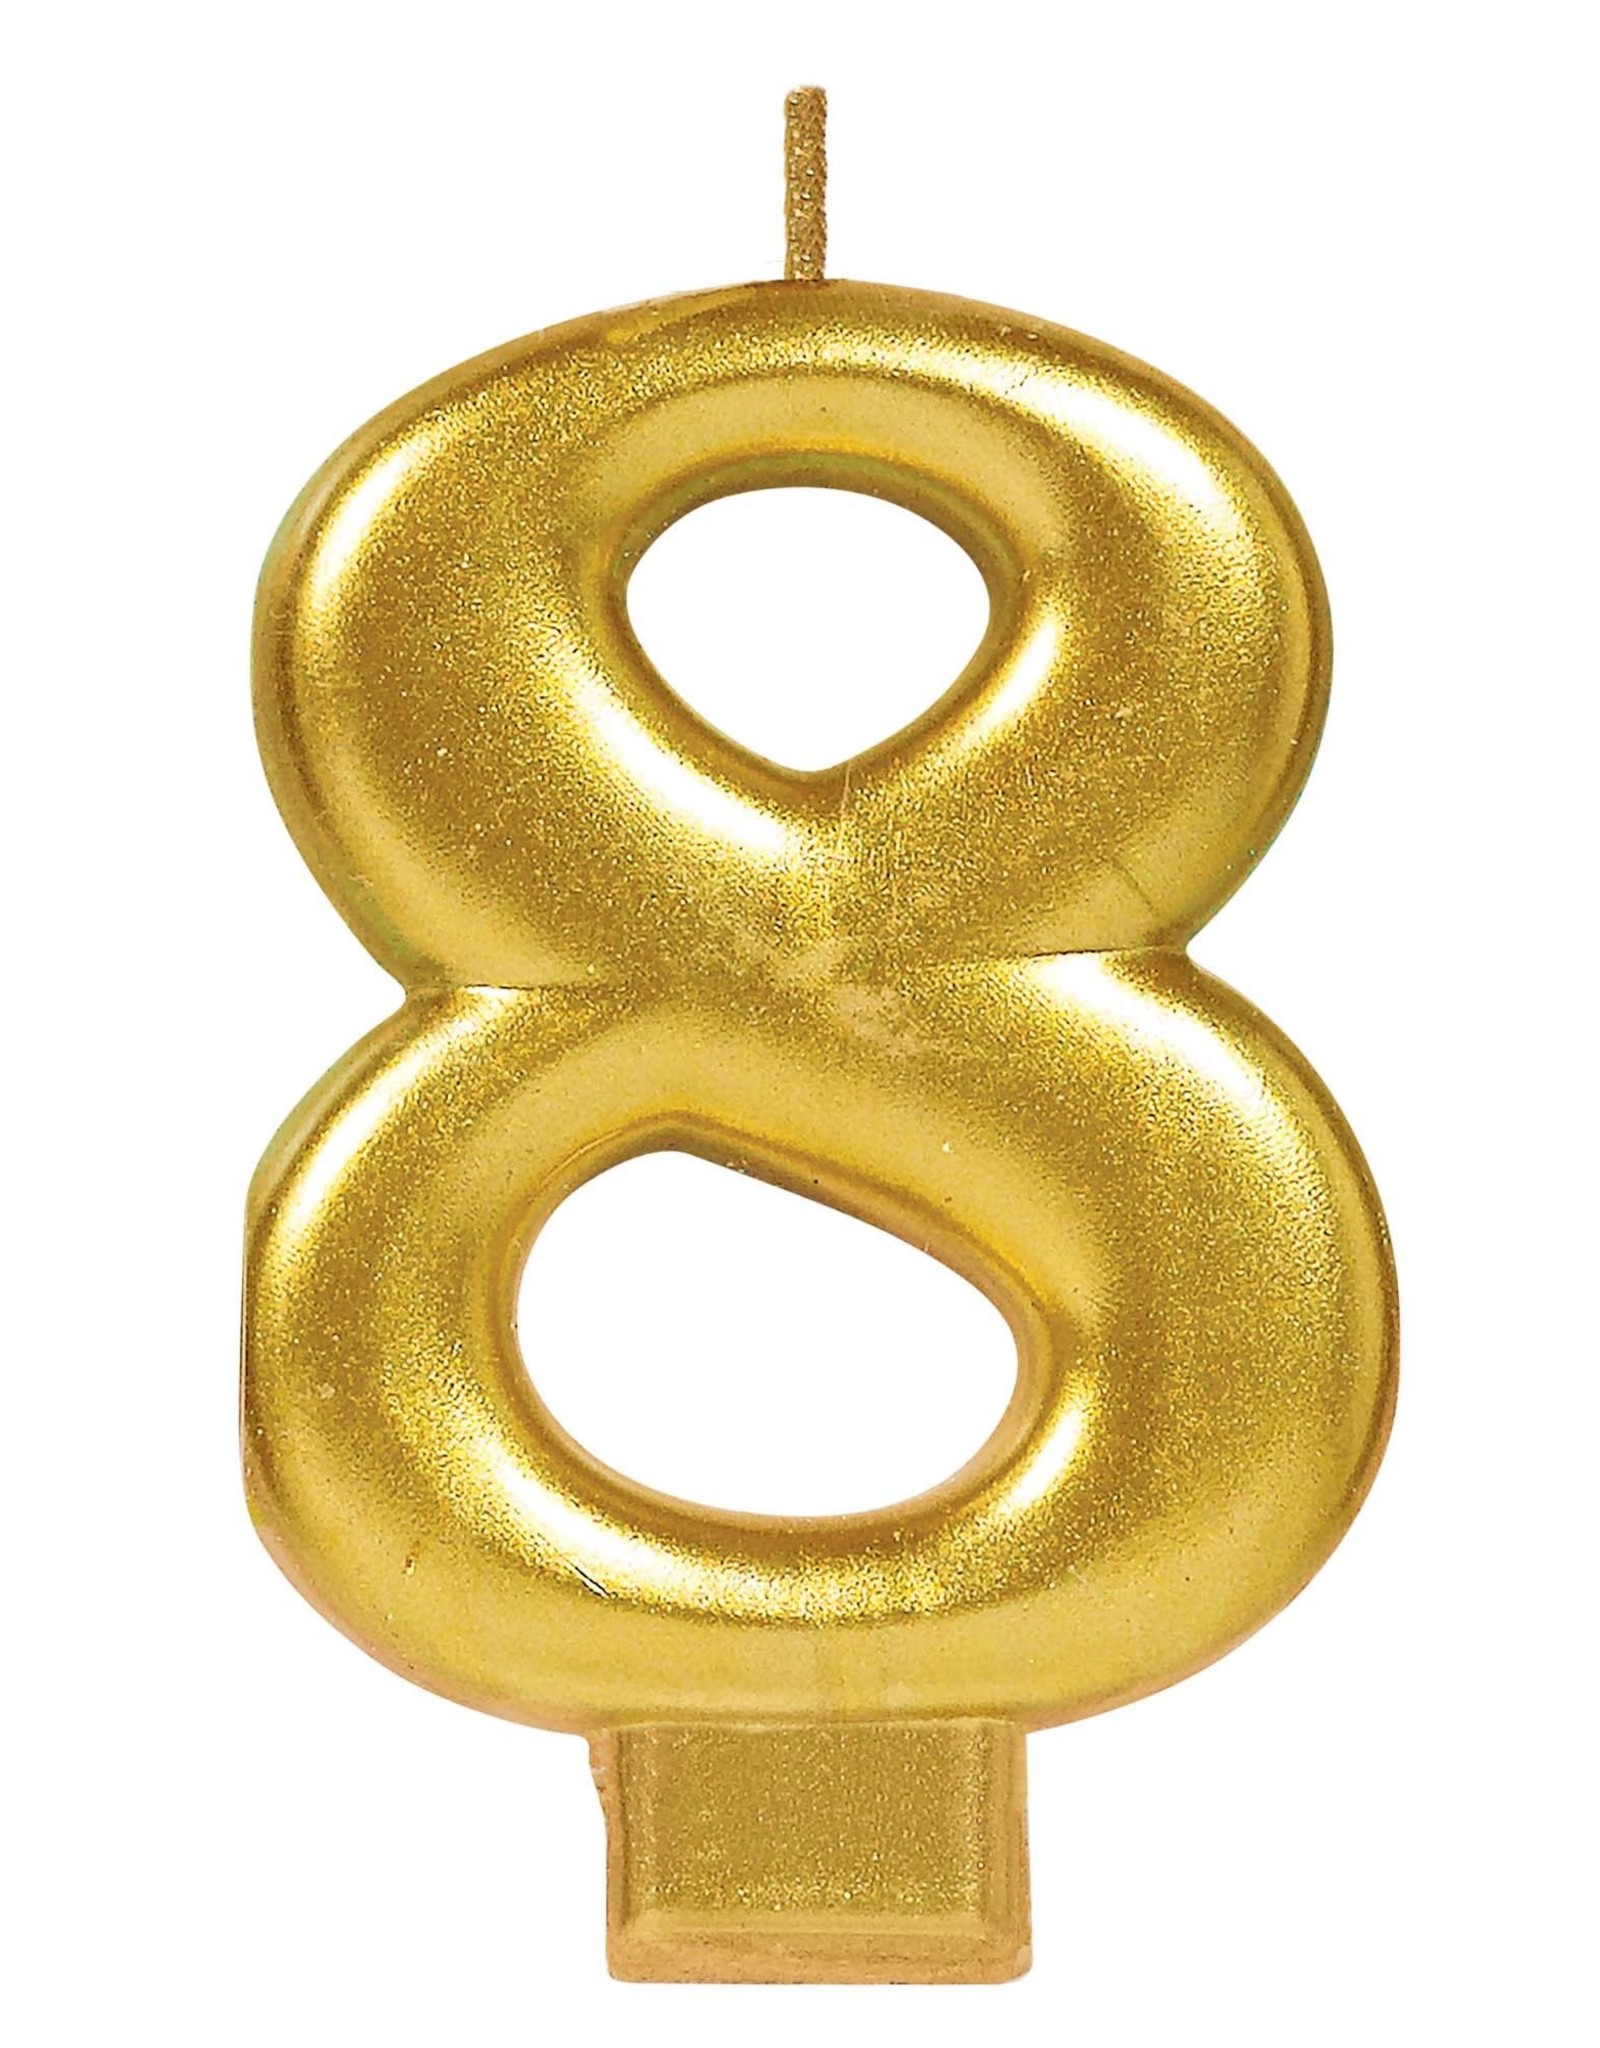 Numeral #8 Metallic Candle - Gold